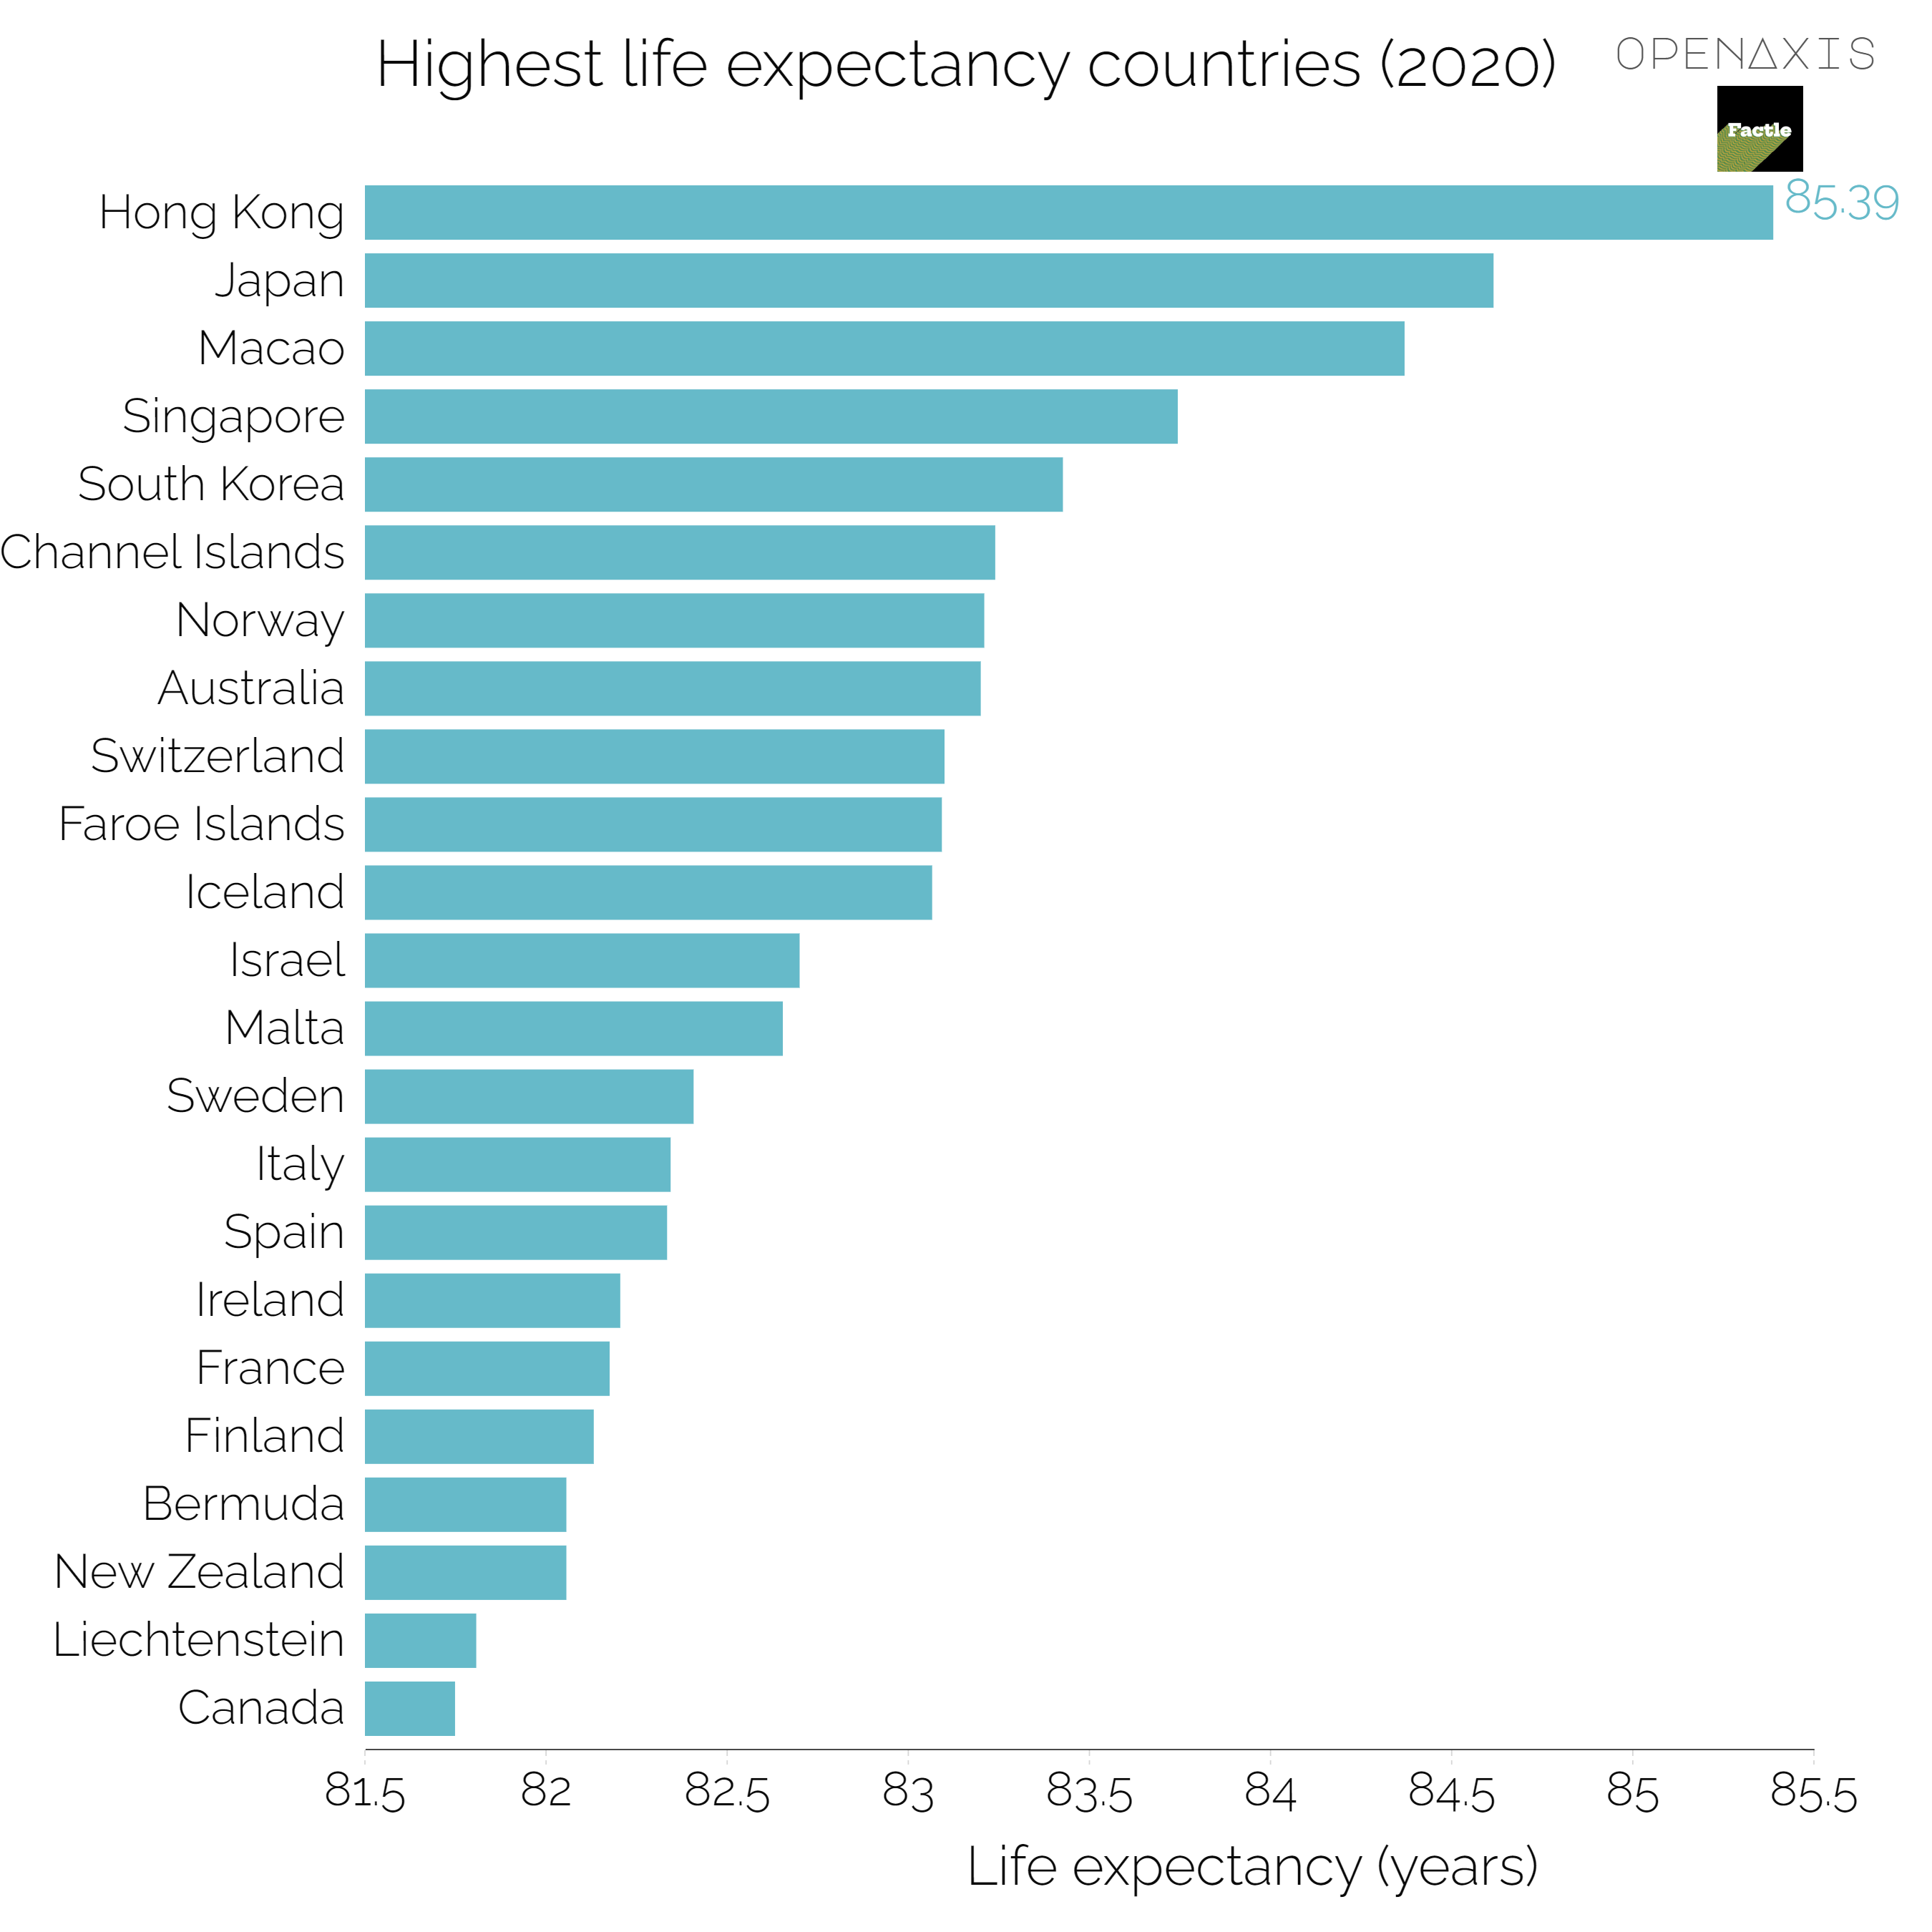 "Highest life expectancy countries (2020)"